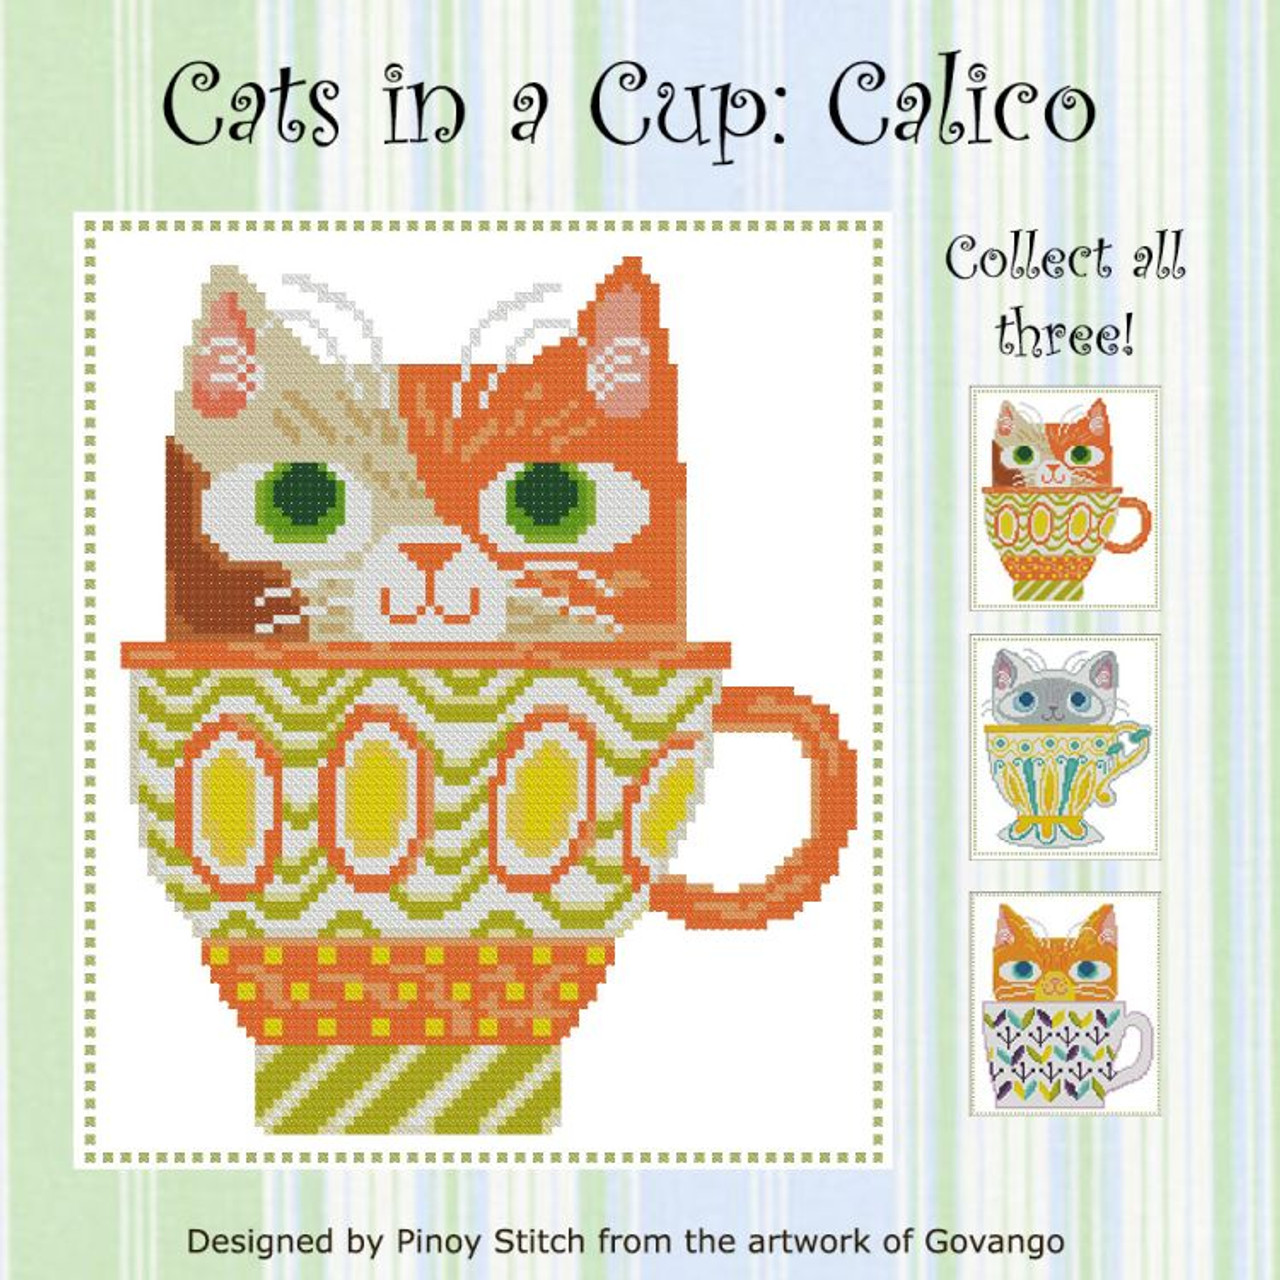 Cats in a Cup Calico